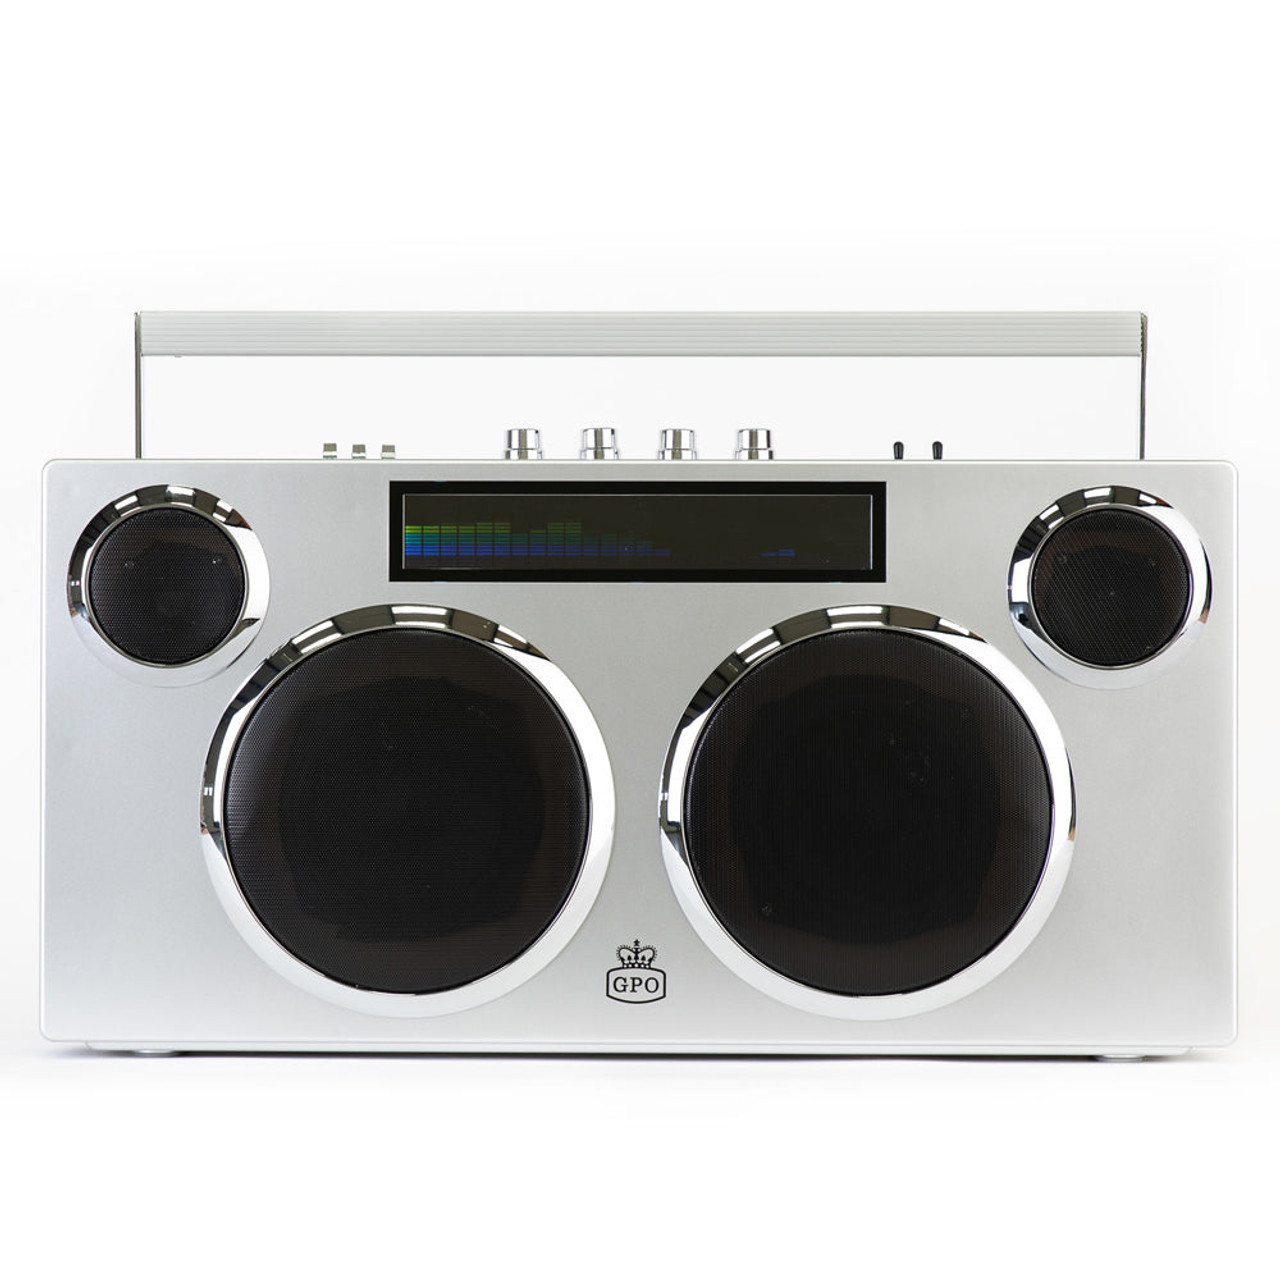 GPO Manhattan Boombox Stereo - Silver (IW-GPO-MANHAT-SIL) shop at AUSTiC  SHOP